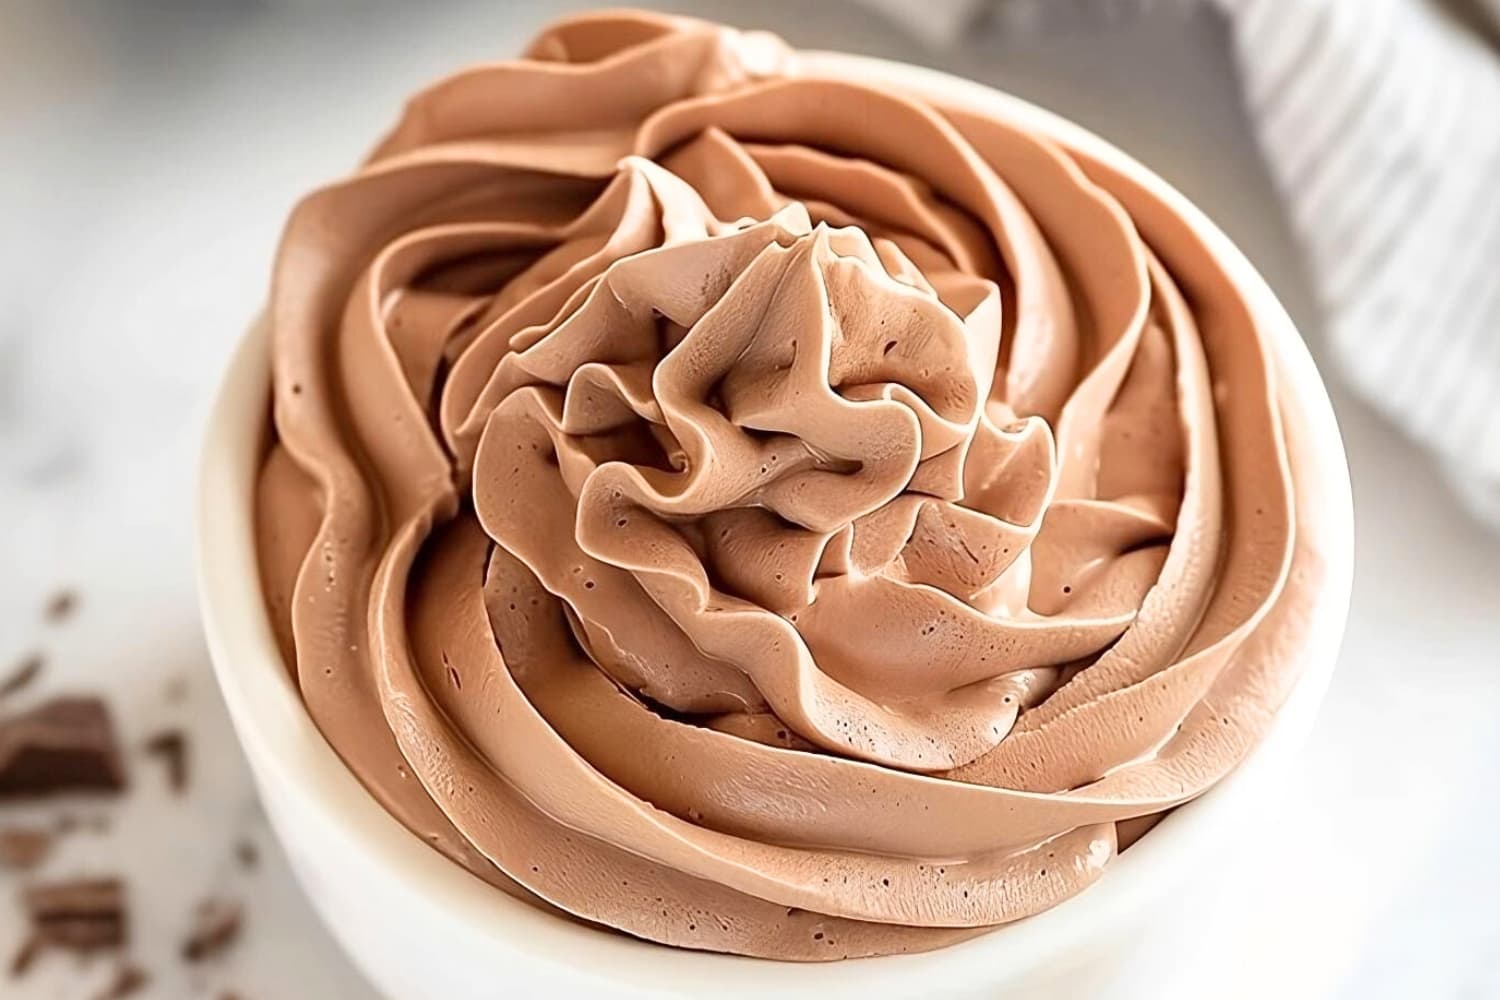 Creamy chocolate whipped cream in a small white bowl.